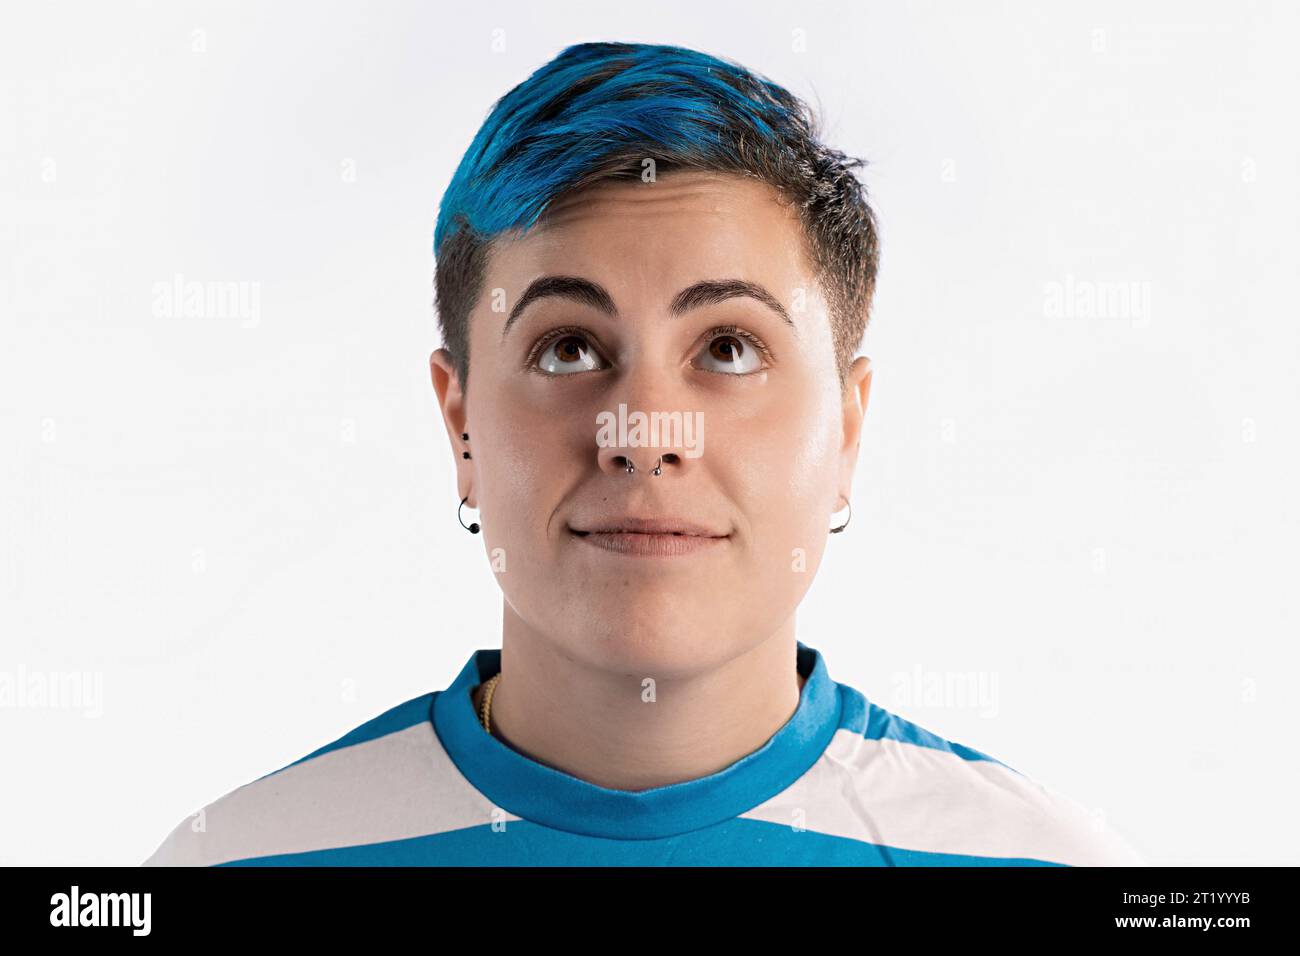 Half-length portrait of a gender fluid woman with vibrant blue short hair on a white background. She exudes a curious demeanor, looking upwards with a Stock Photo